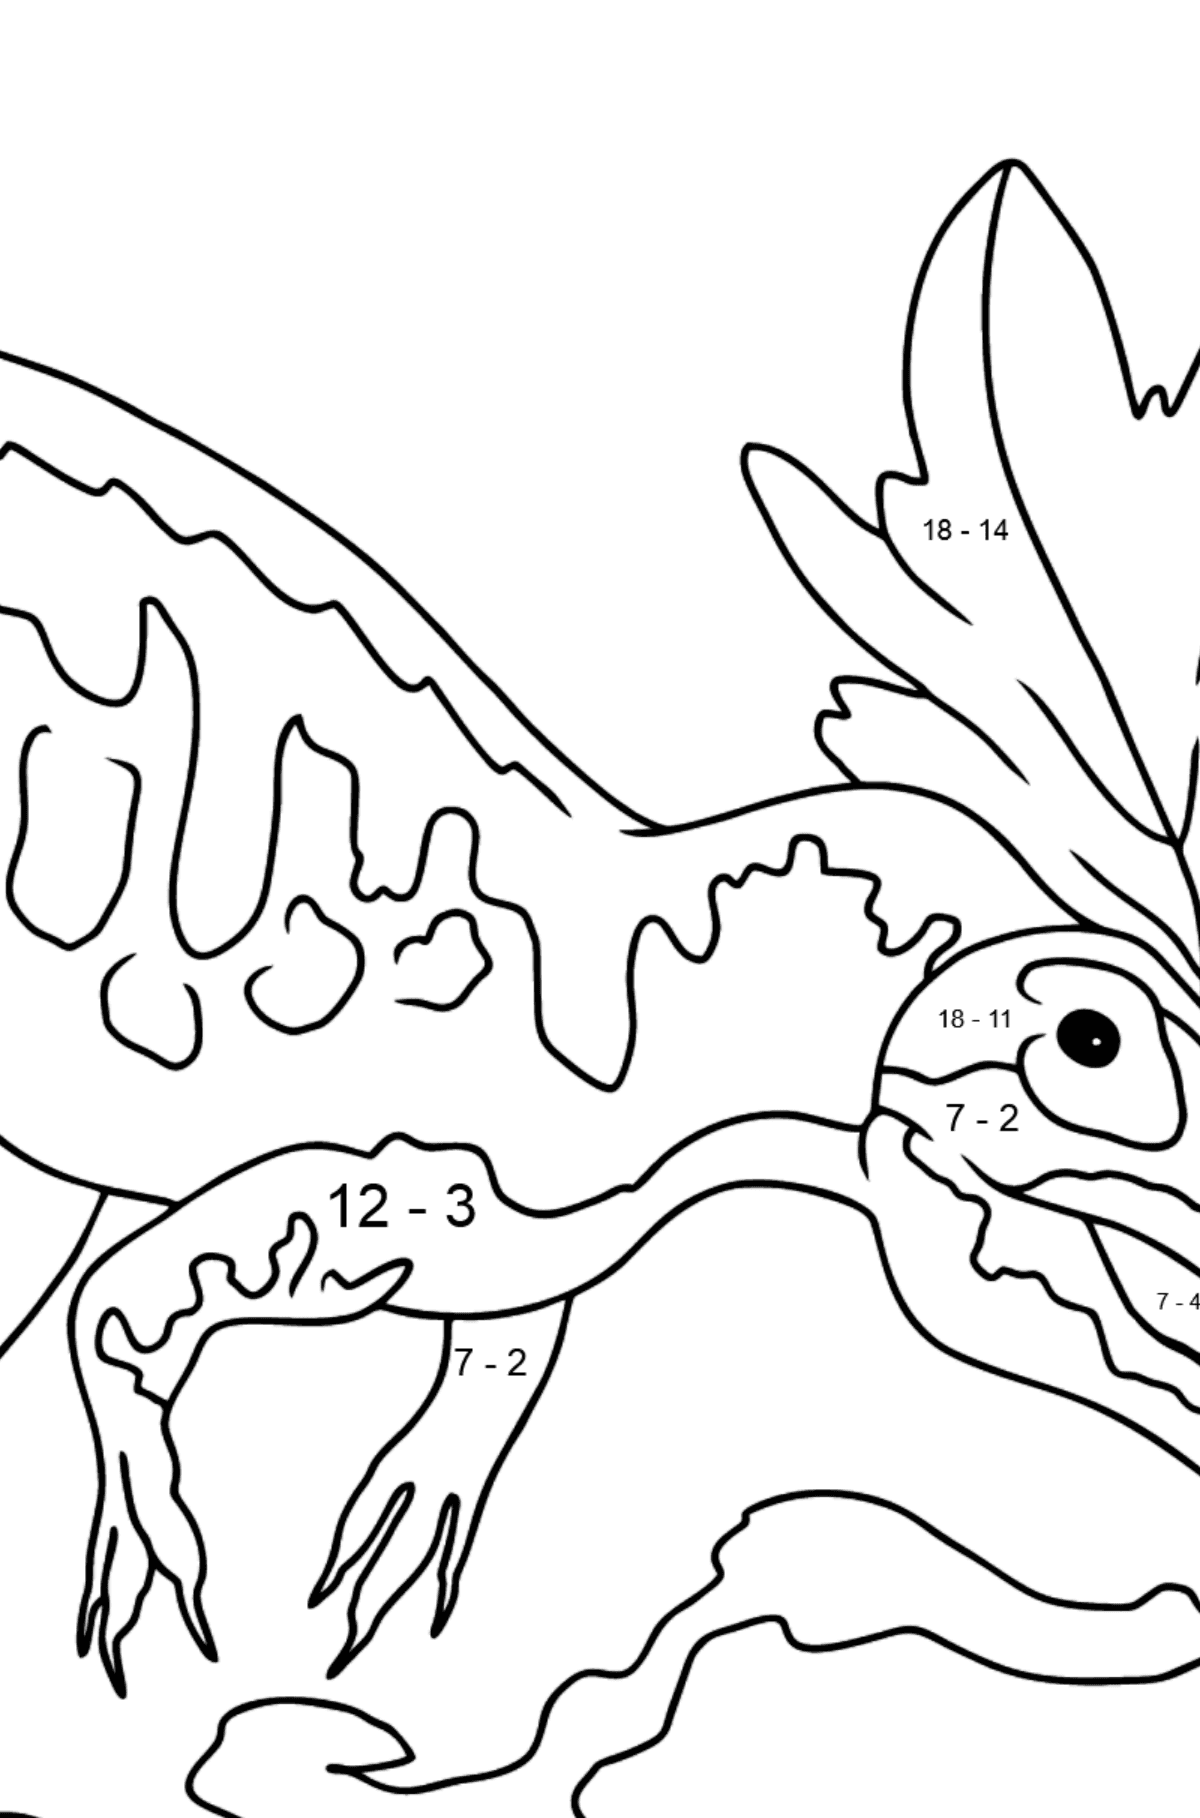 Allosaurus picture - Math Coloring - Subtraction for Kids